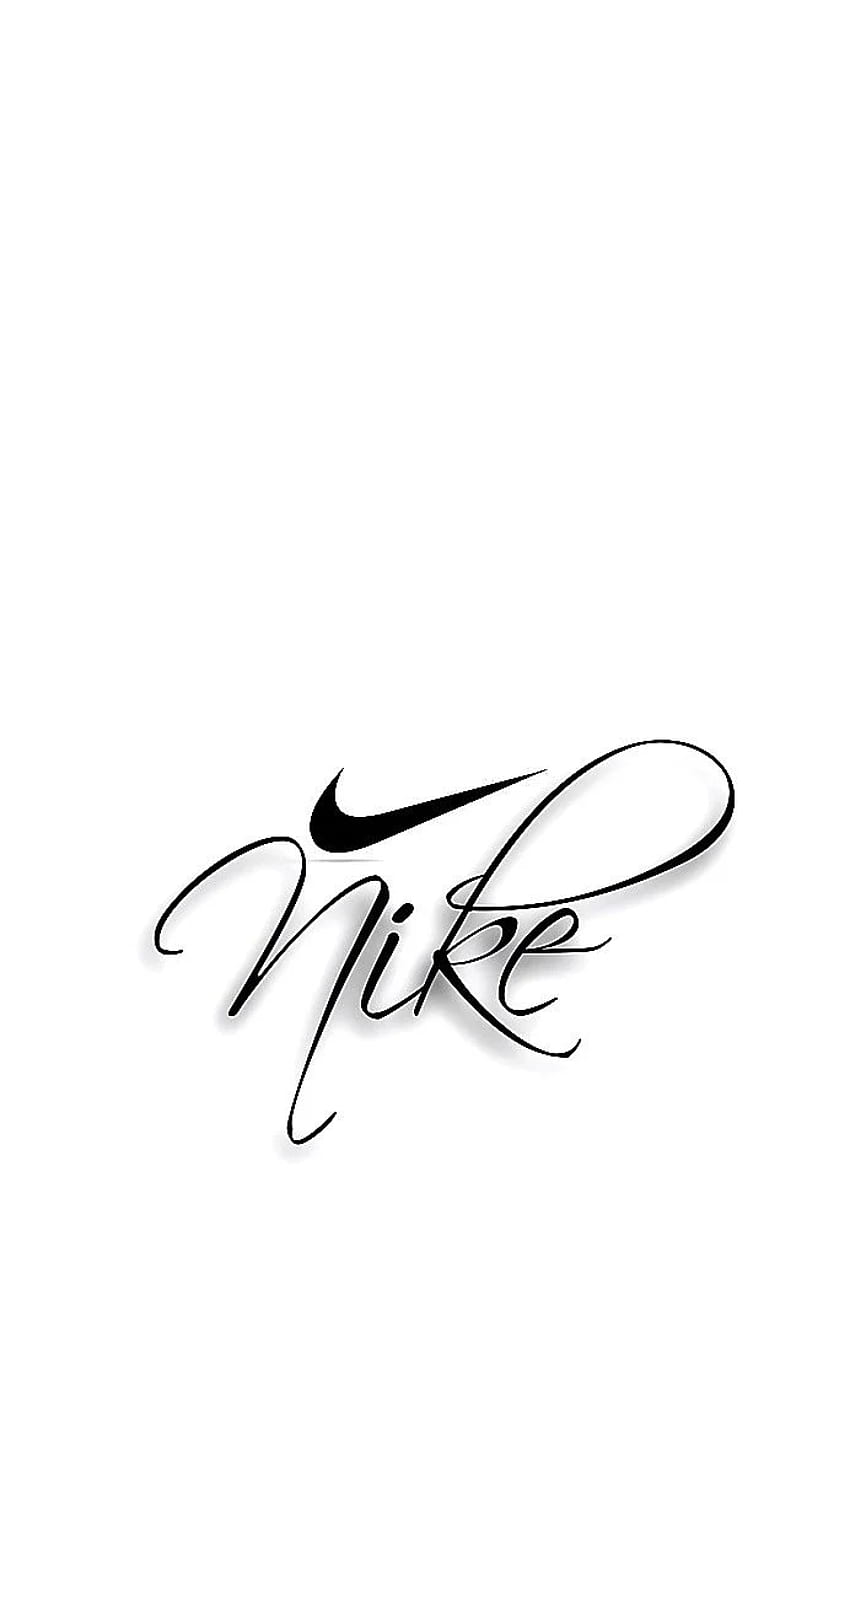 Offwhite Nike Wallpapers  Wallpaper Cave B00  Cool nike wallpapers  Hypebeast iphone wallpaper Nike wallpaper